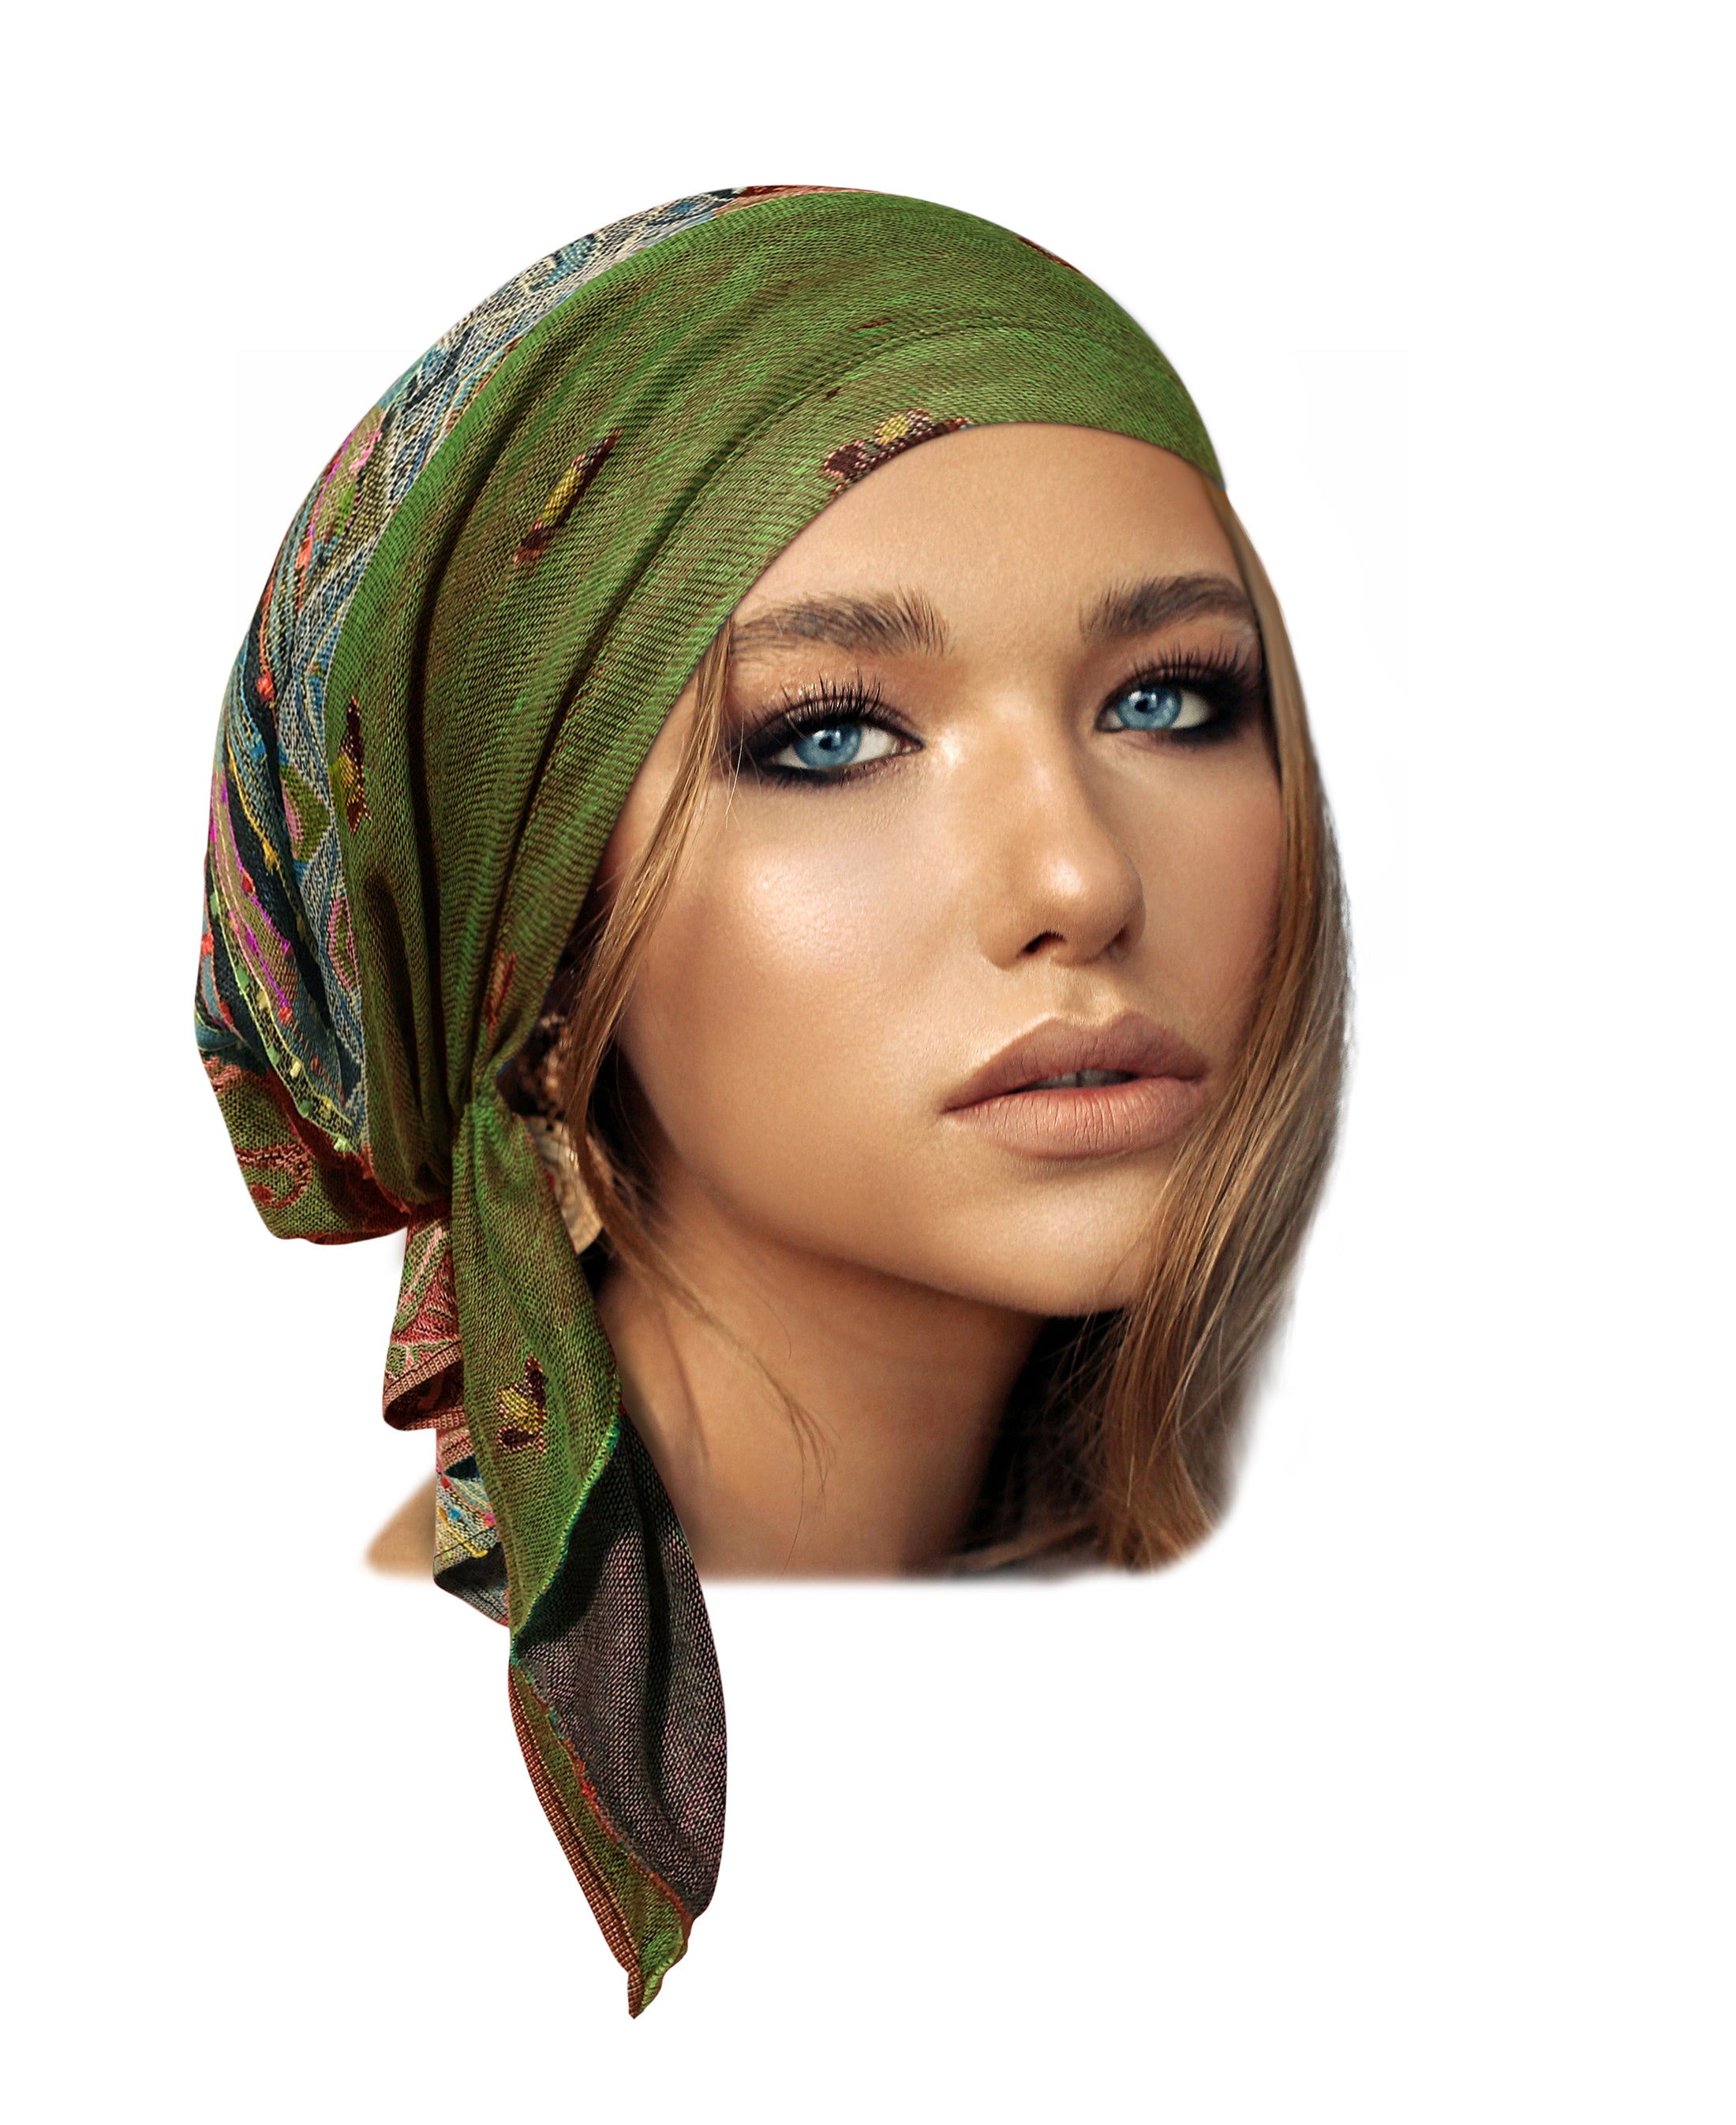 Olive green cashmere headscarf